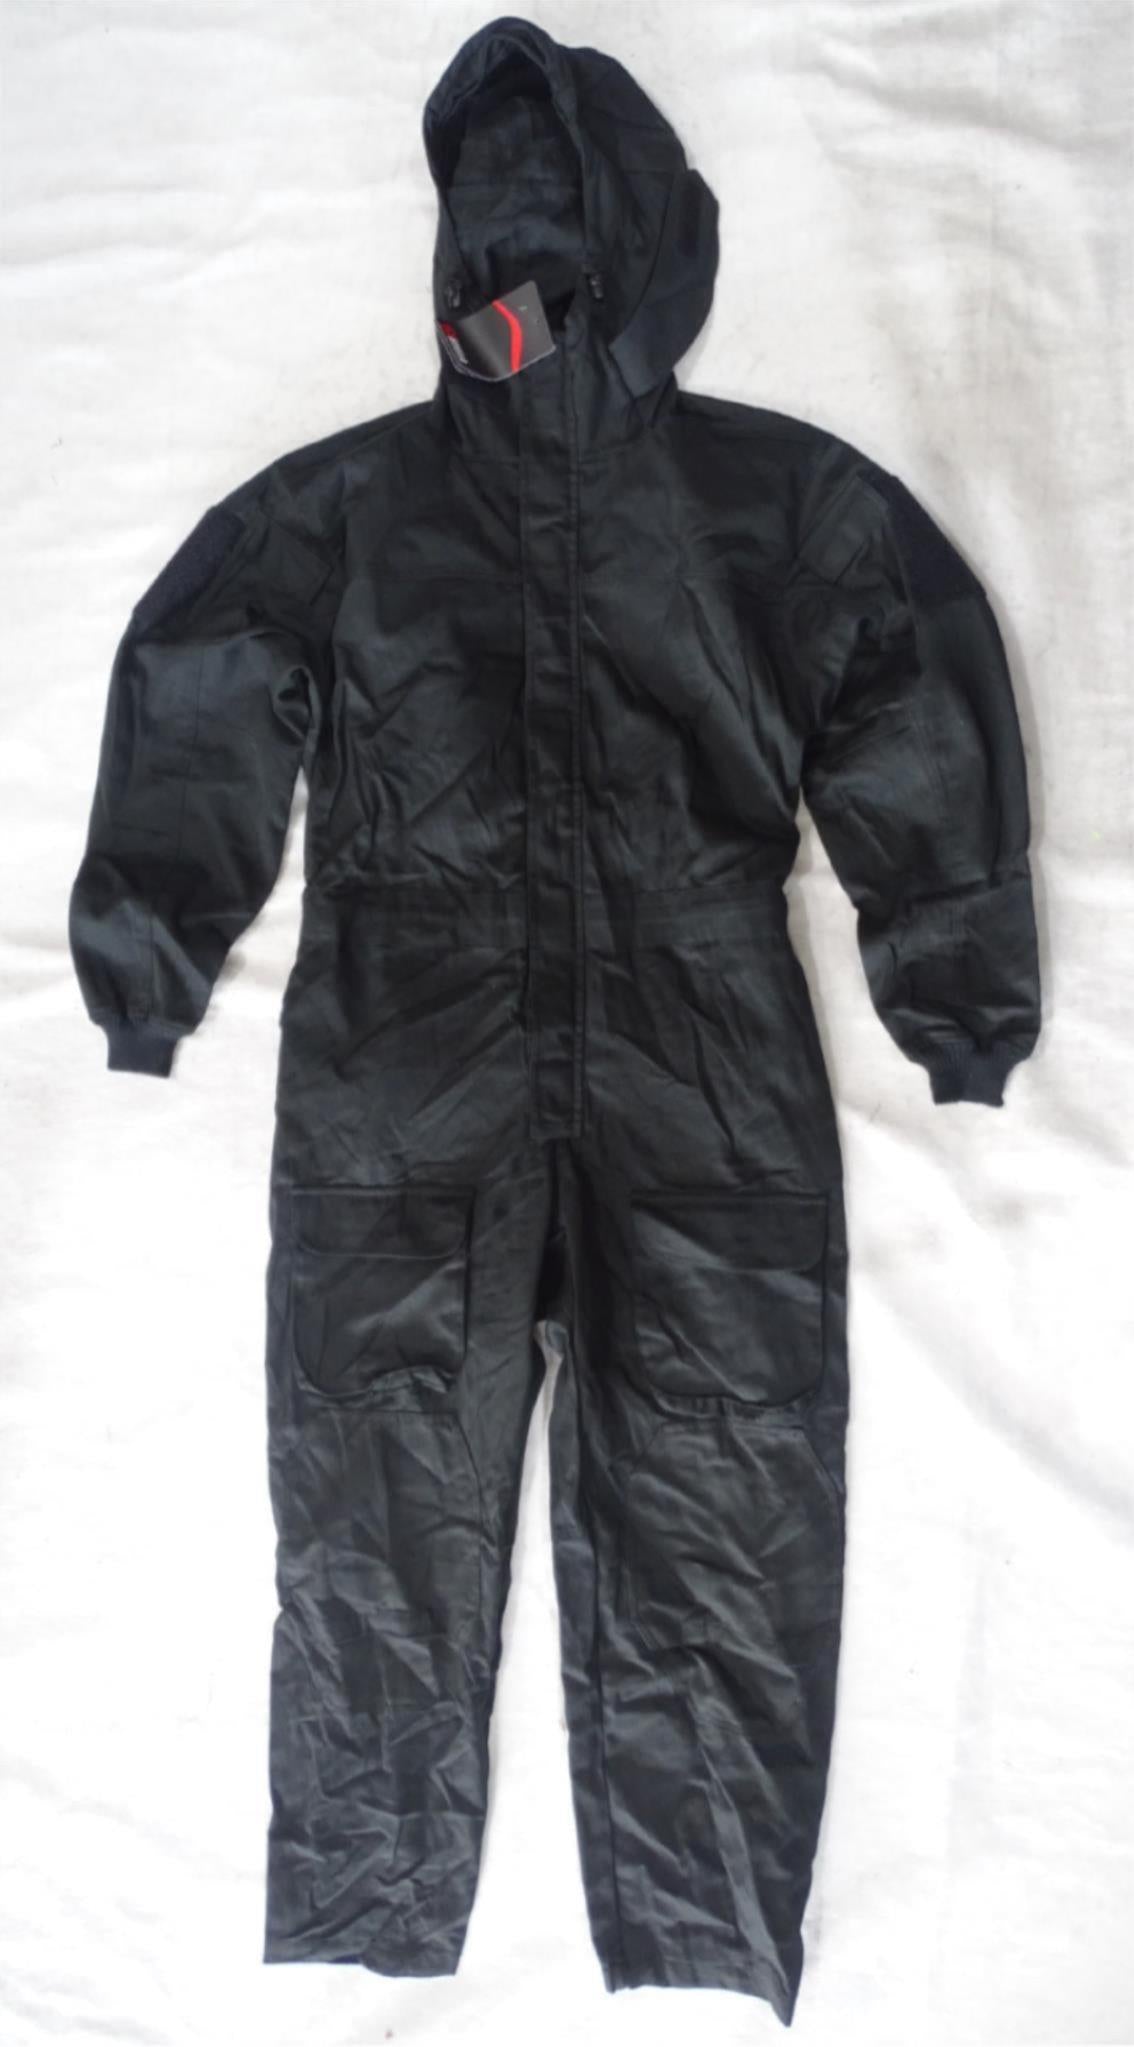 New Keela Black Tactical Overall Coverall Paintballing Workwear Airsof ...